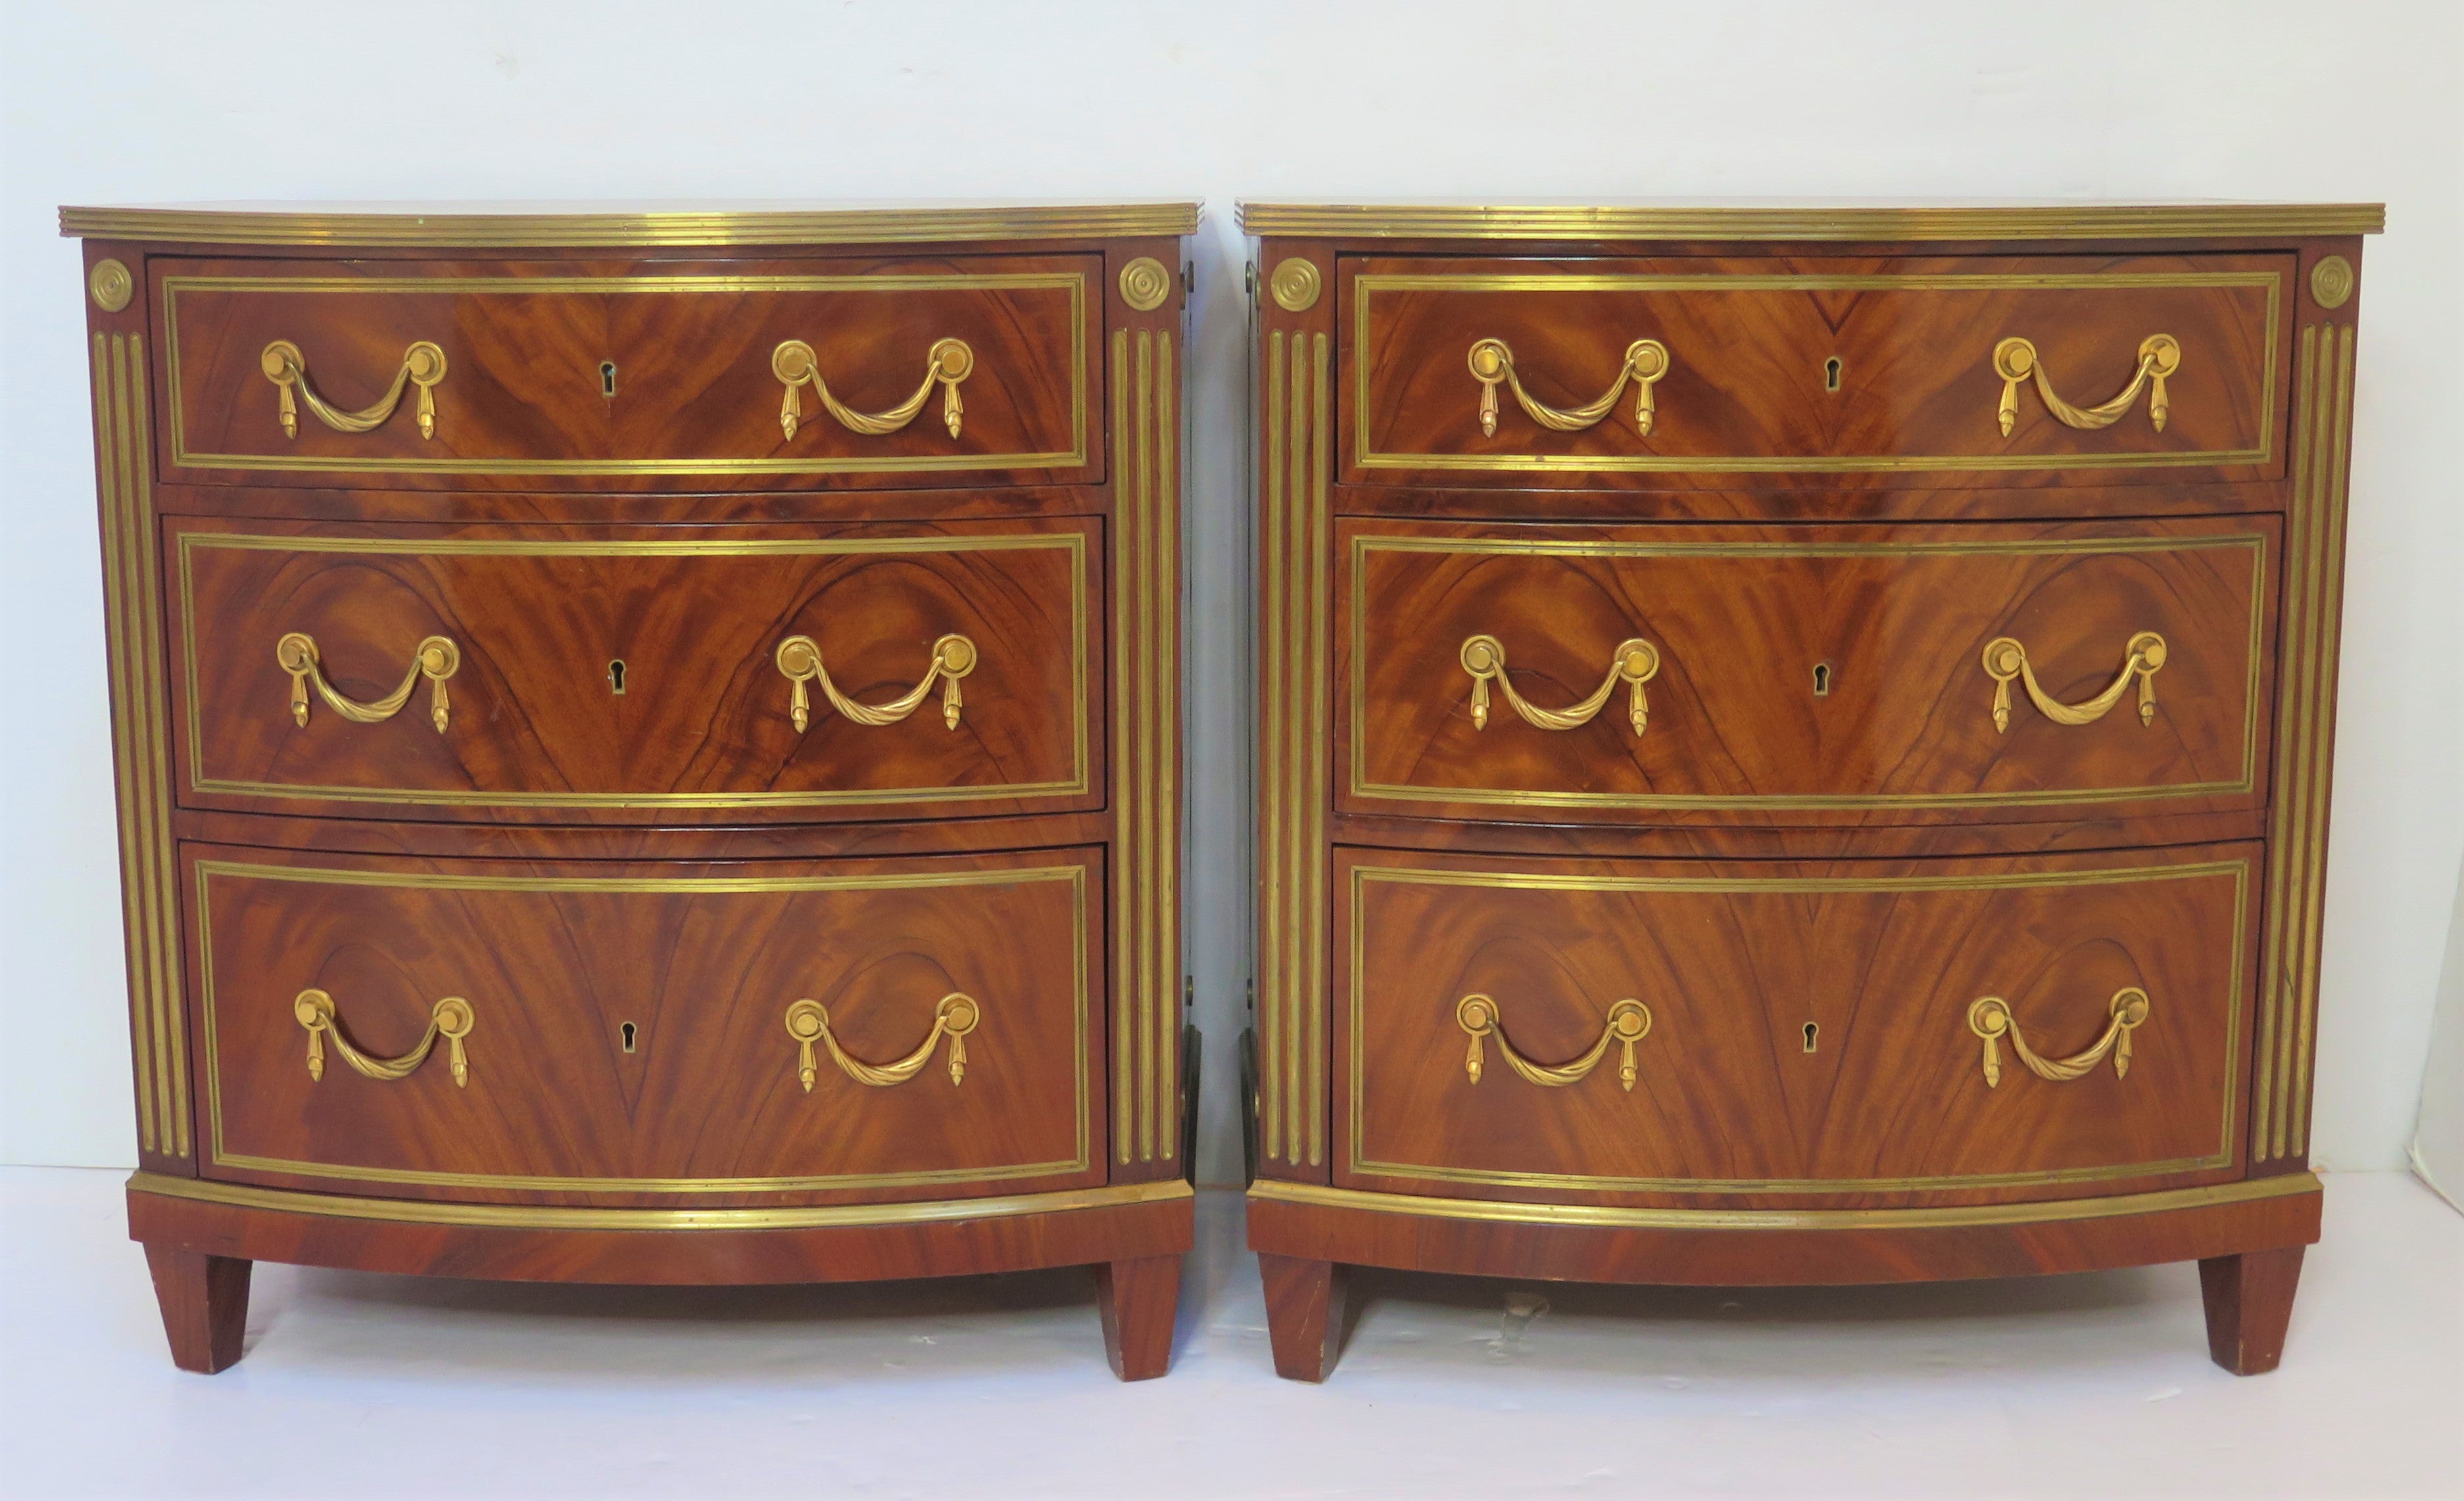 note the beautiful book-matched figured mahogany drawer fronts